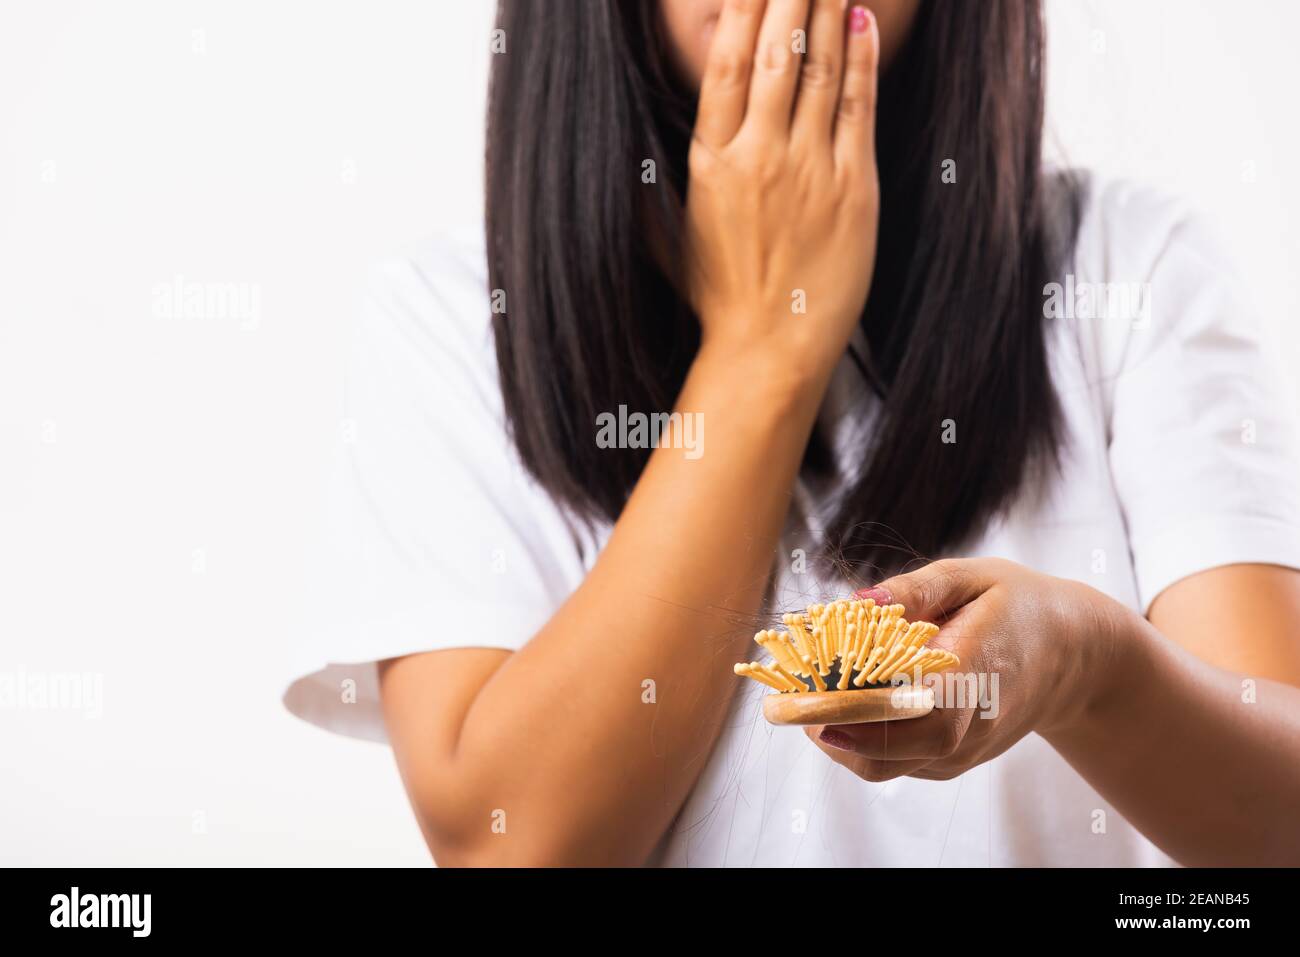 Woman weak hair problem her hold hairbrush with damaged long loss hair in the comb brush on hand Stock Photo